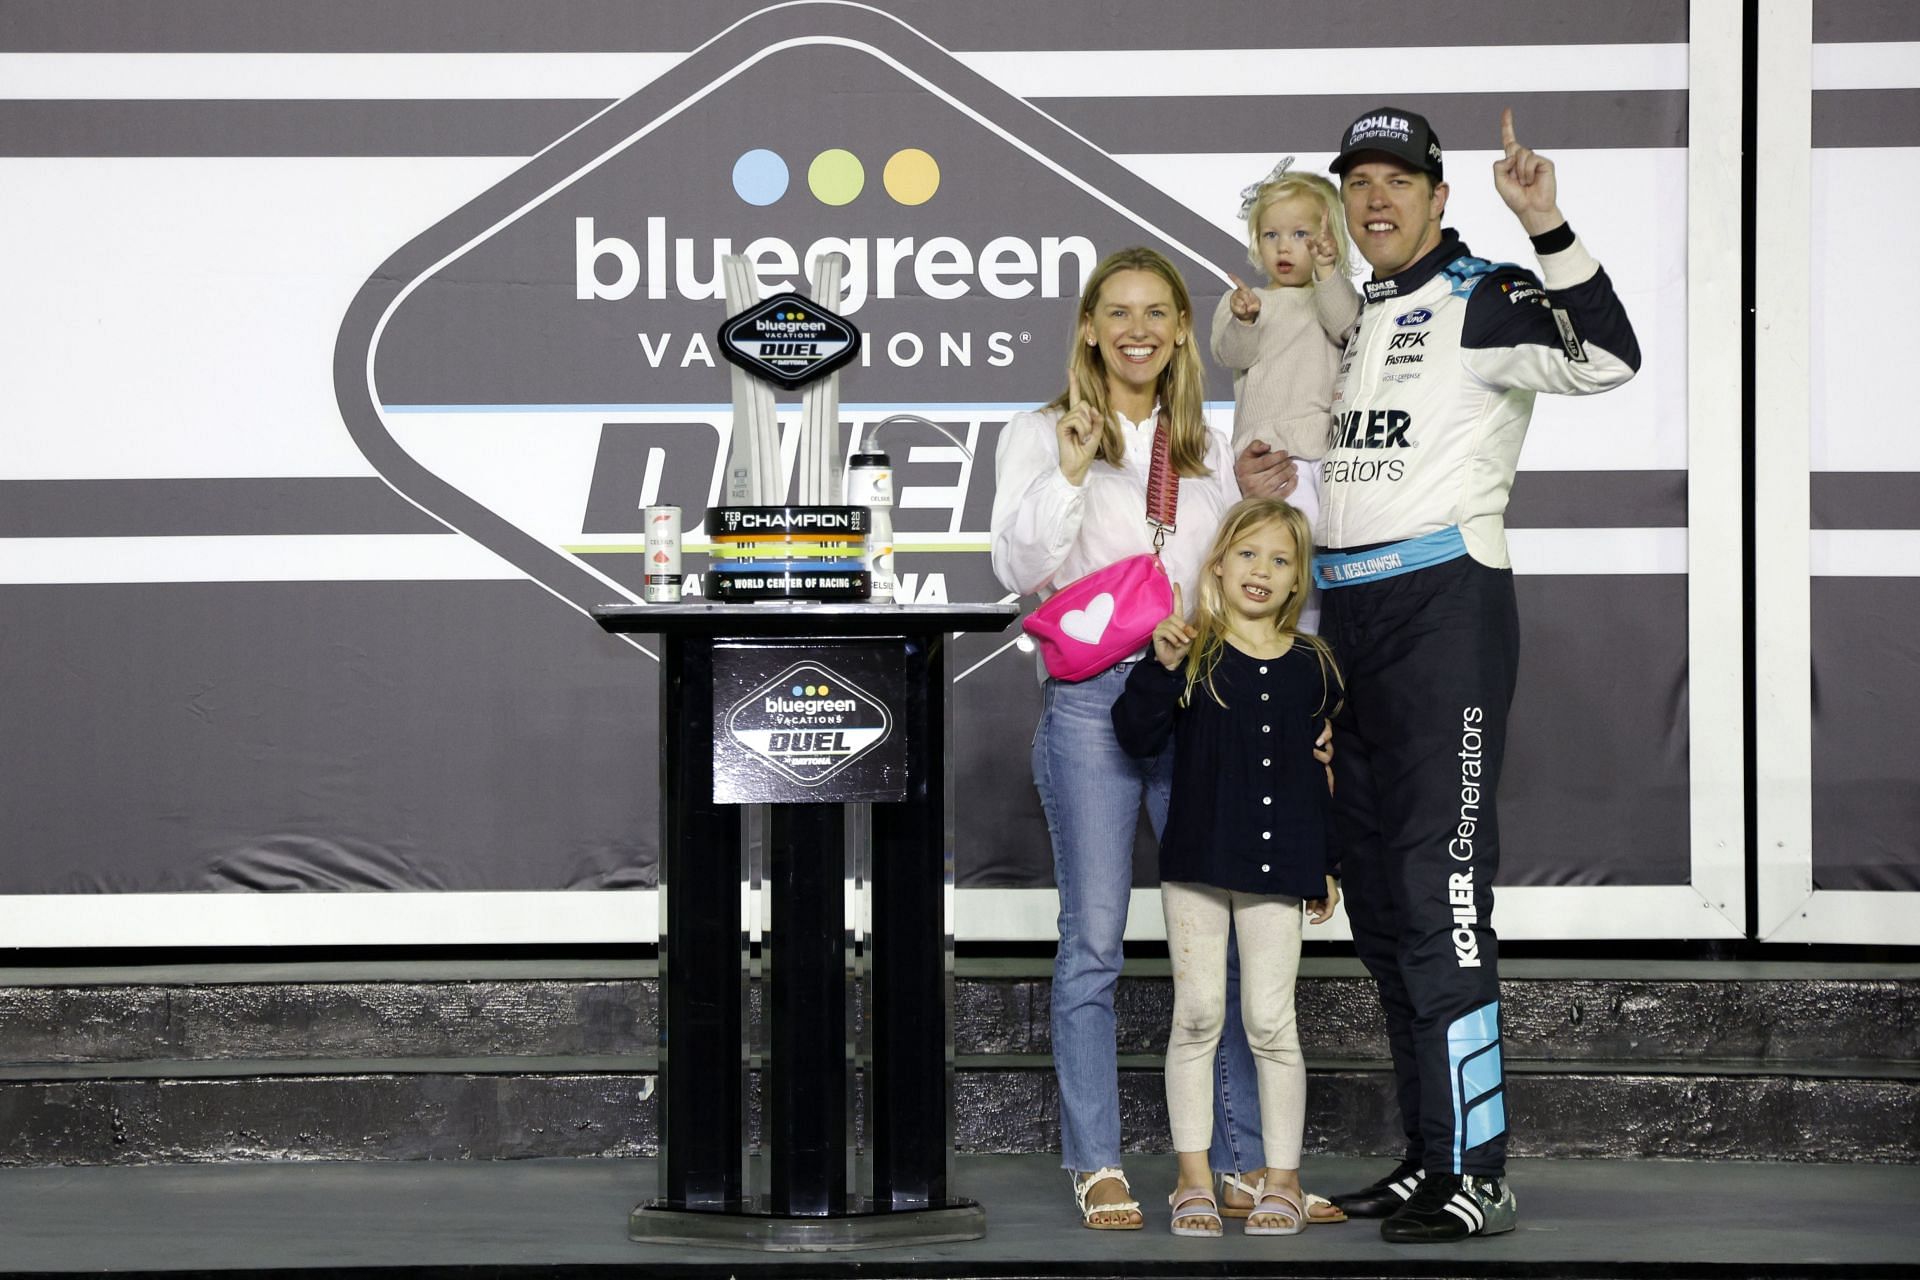 Brad Keselowski celebrates with his family on securing pole at the NASCAR Cup Series Bluegreen Vacations Duel #1 at Daytona (Photo by Chris Graythen/Getty Images)